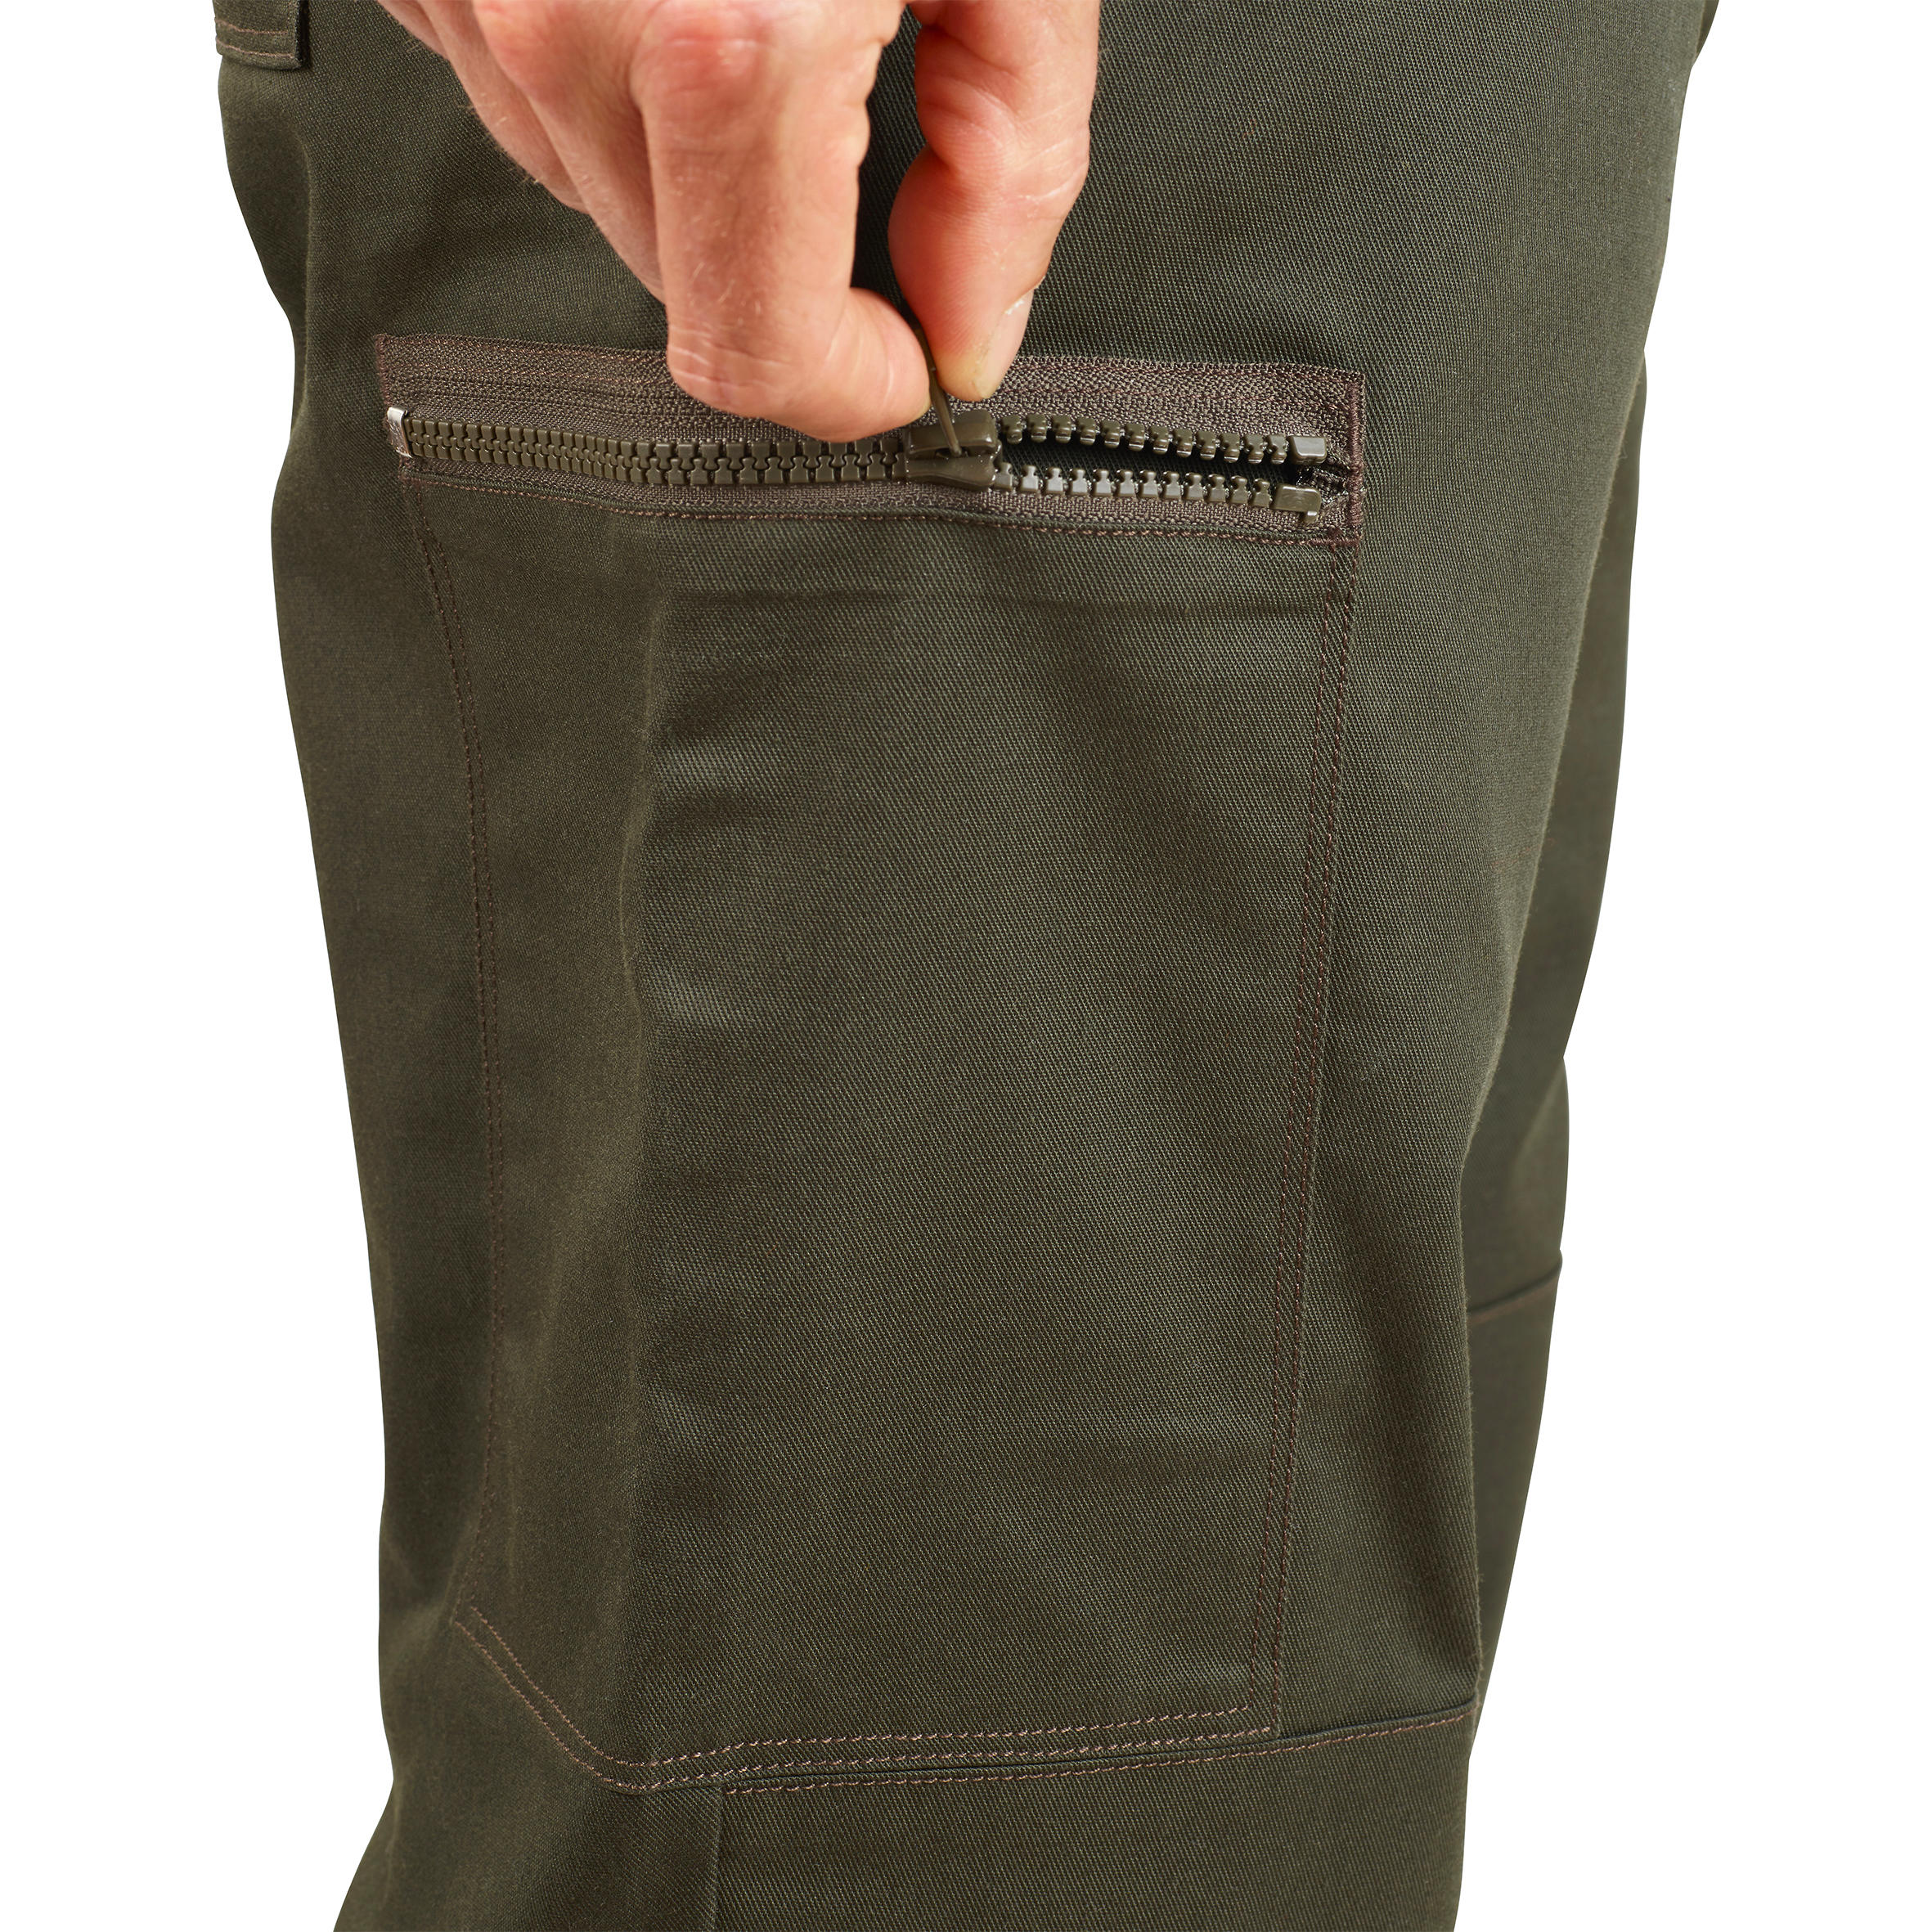 STEPPE 100 hunting trousers - green - Solognac